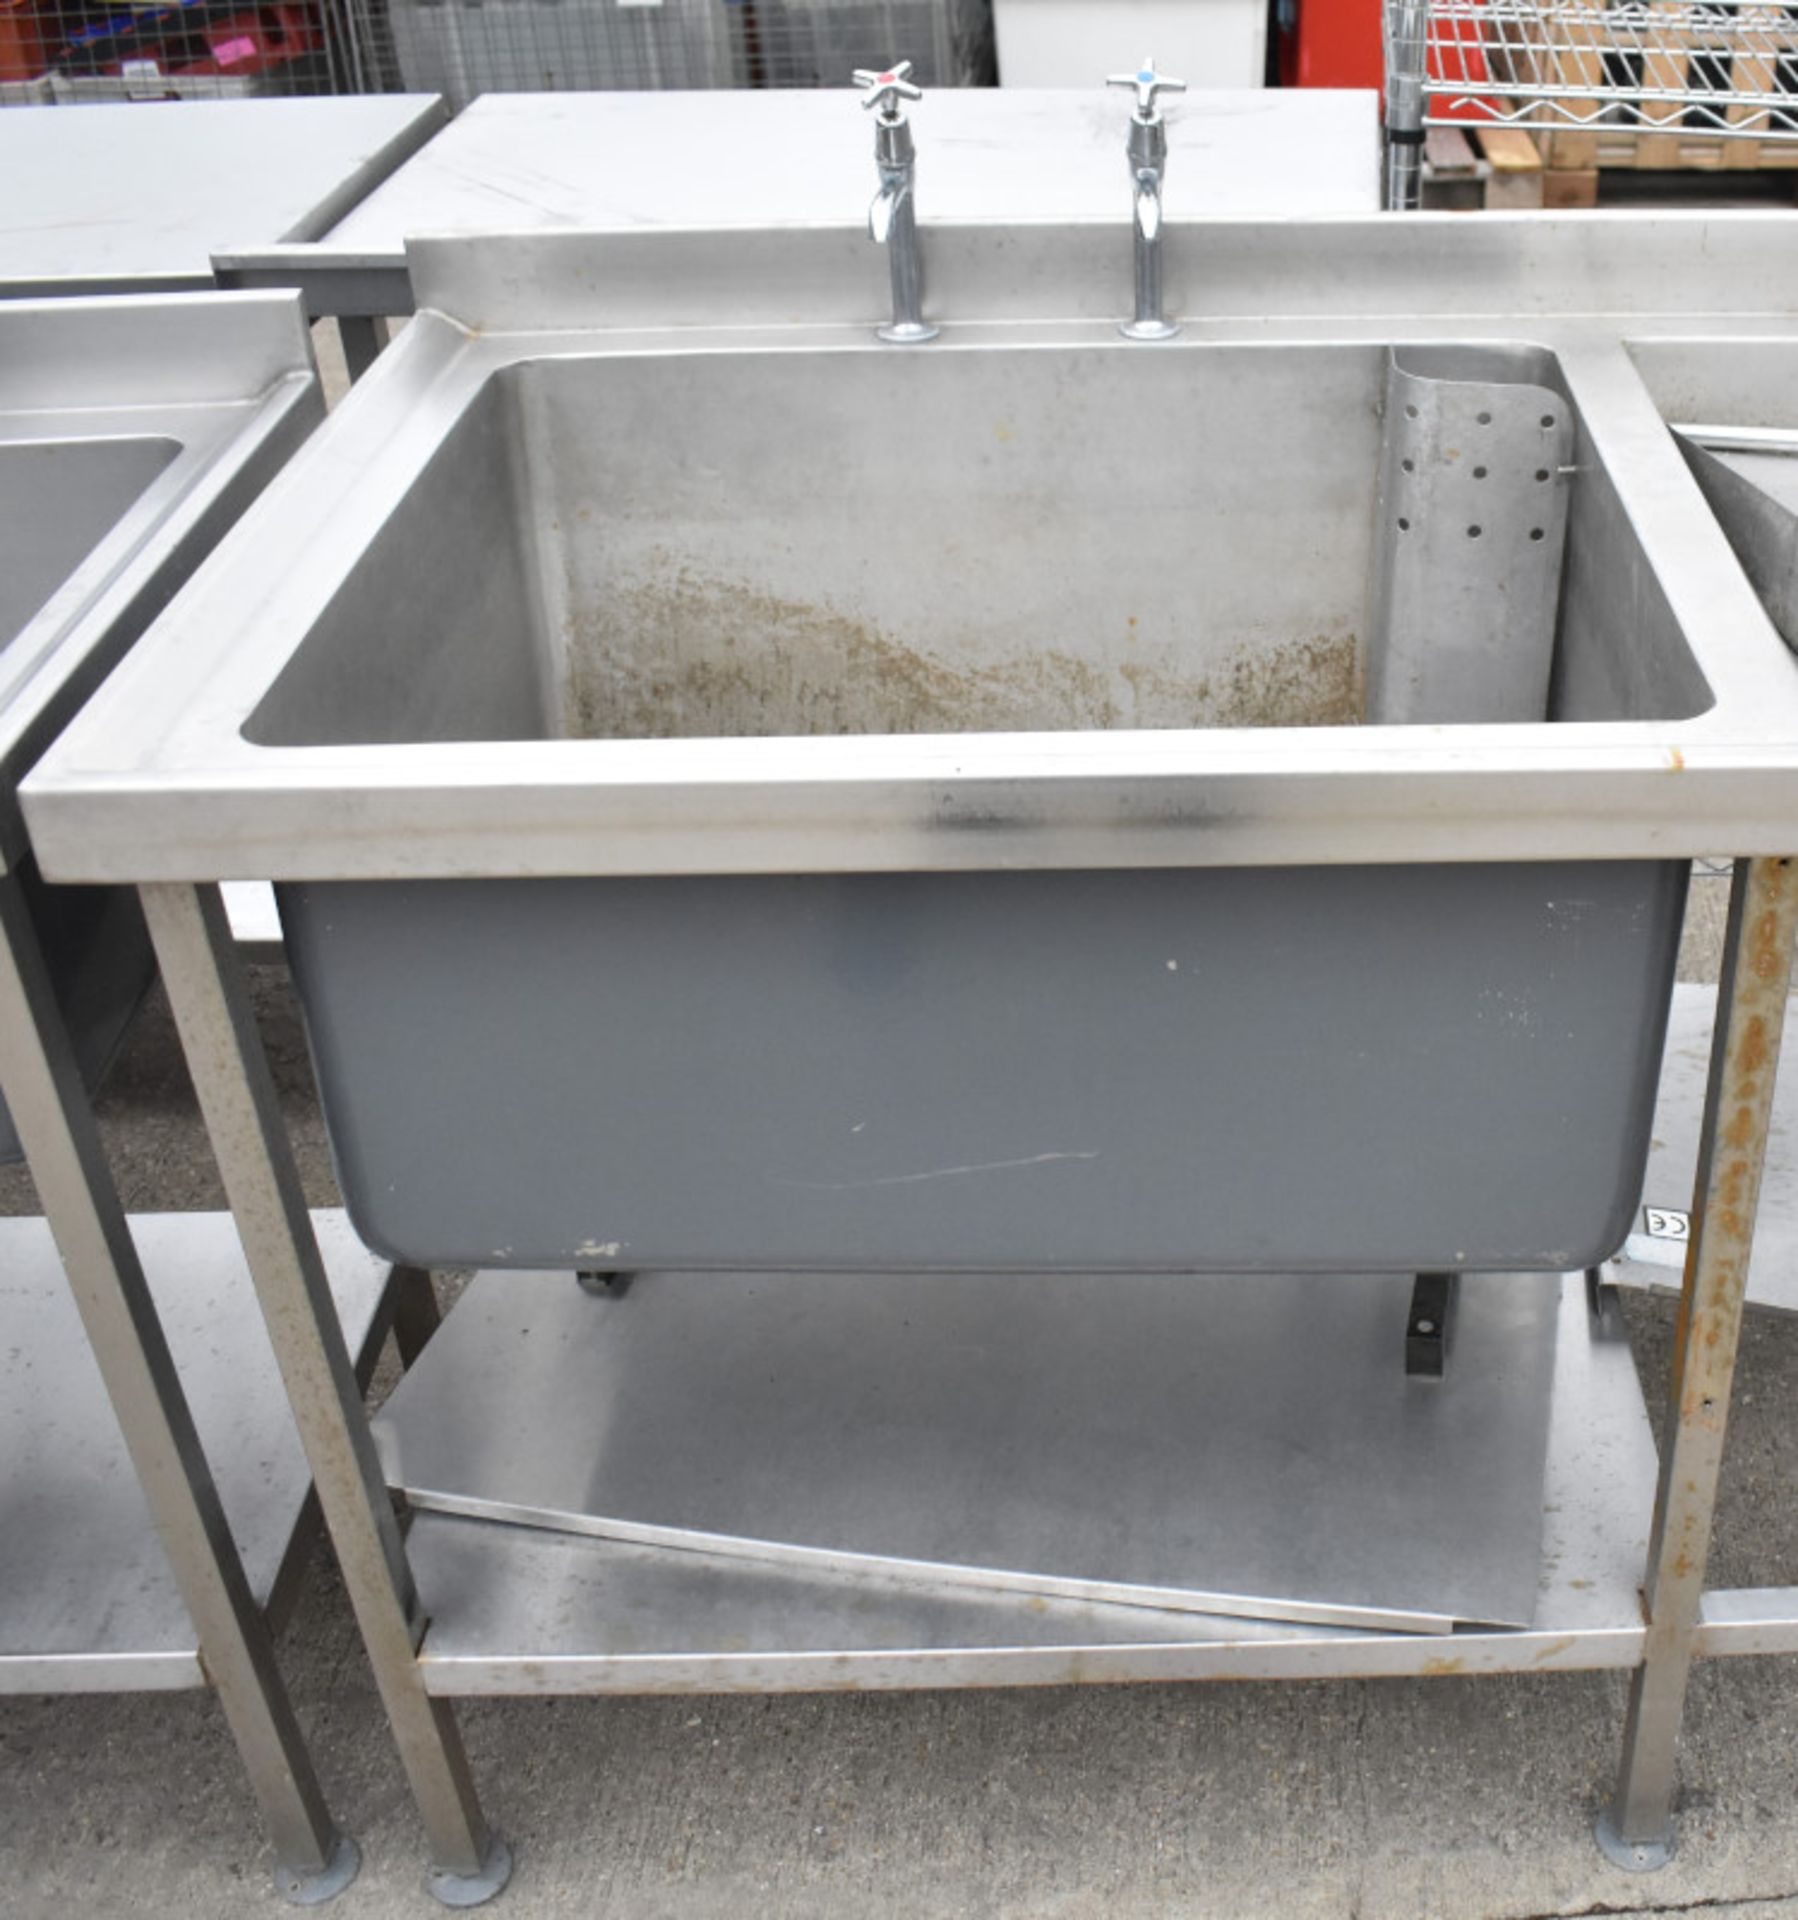 Stainless steel Double drainer Prep Sink Unit L 2700mm x D 750mm x H 950mm - Image 4 of 5